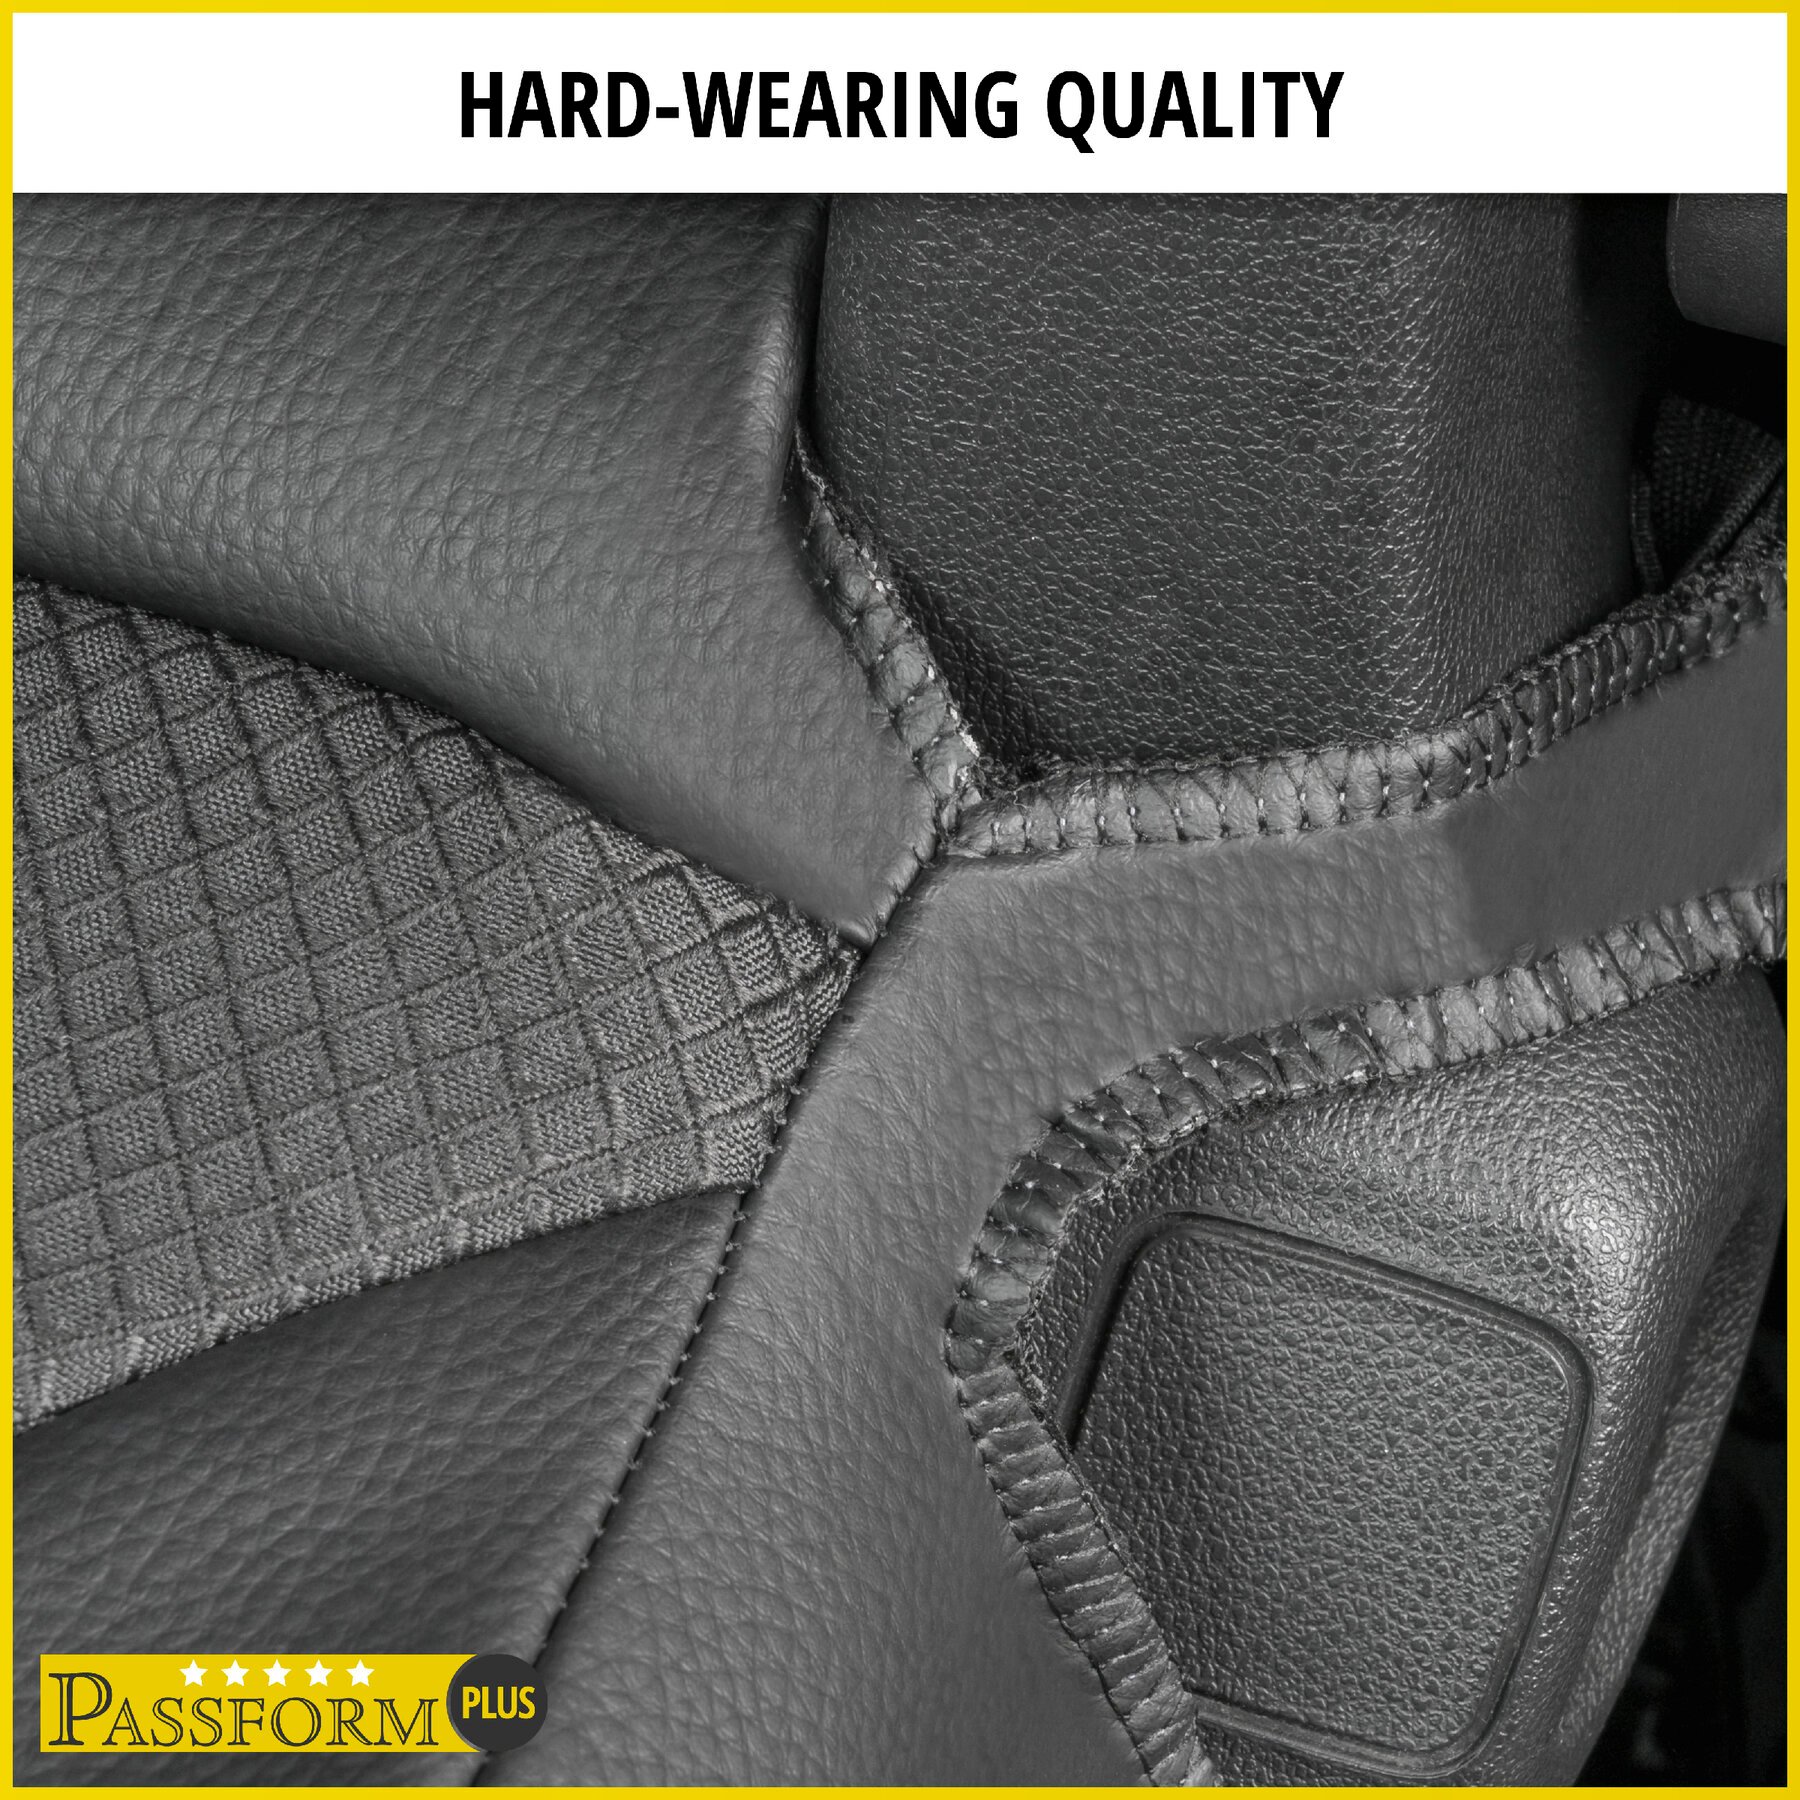 Premium Seat Cover for Mercedes-Benz Sprinter 06/2006-Today, 2 single seat covers front + 1 armrest cover